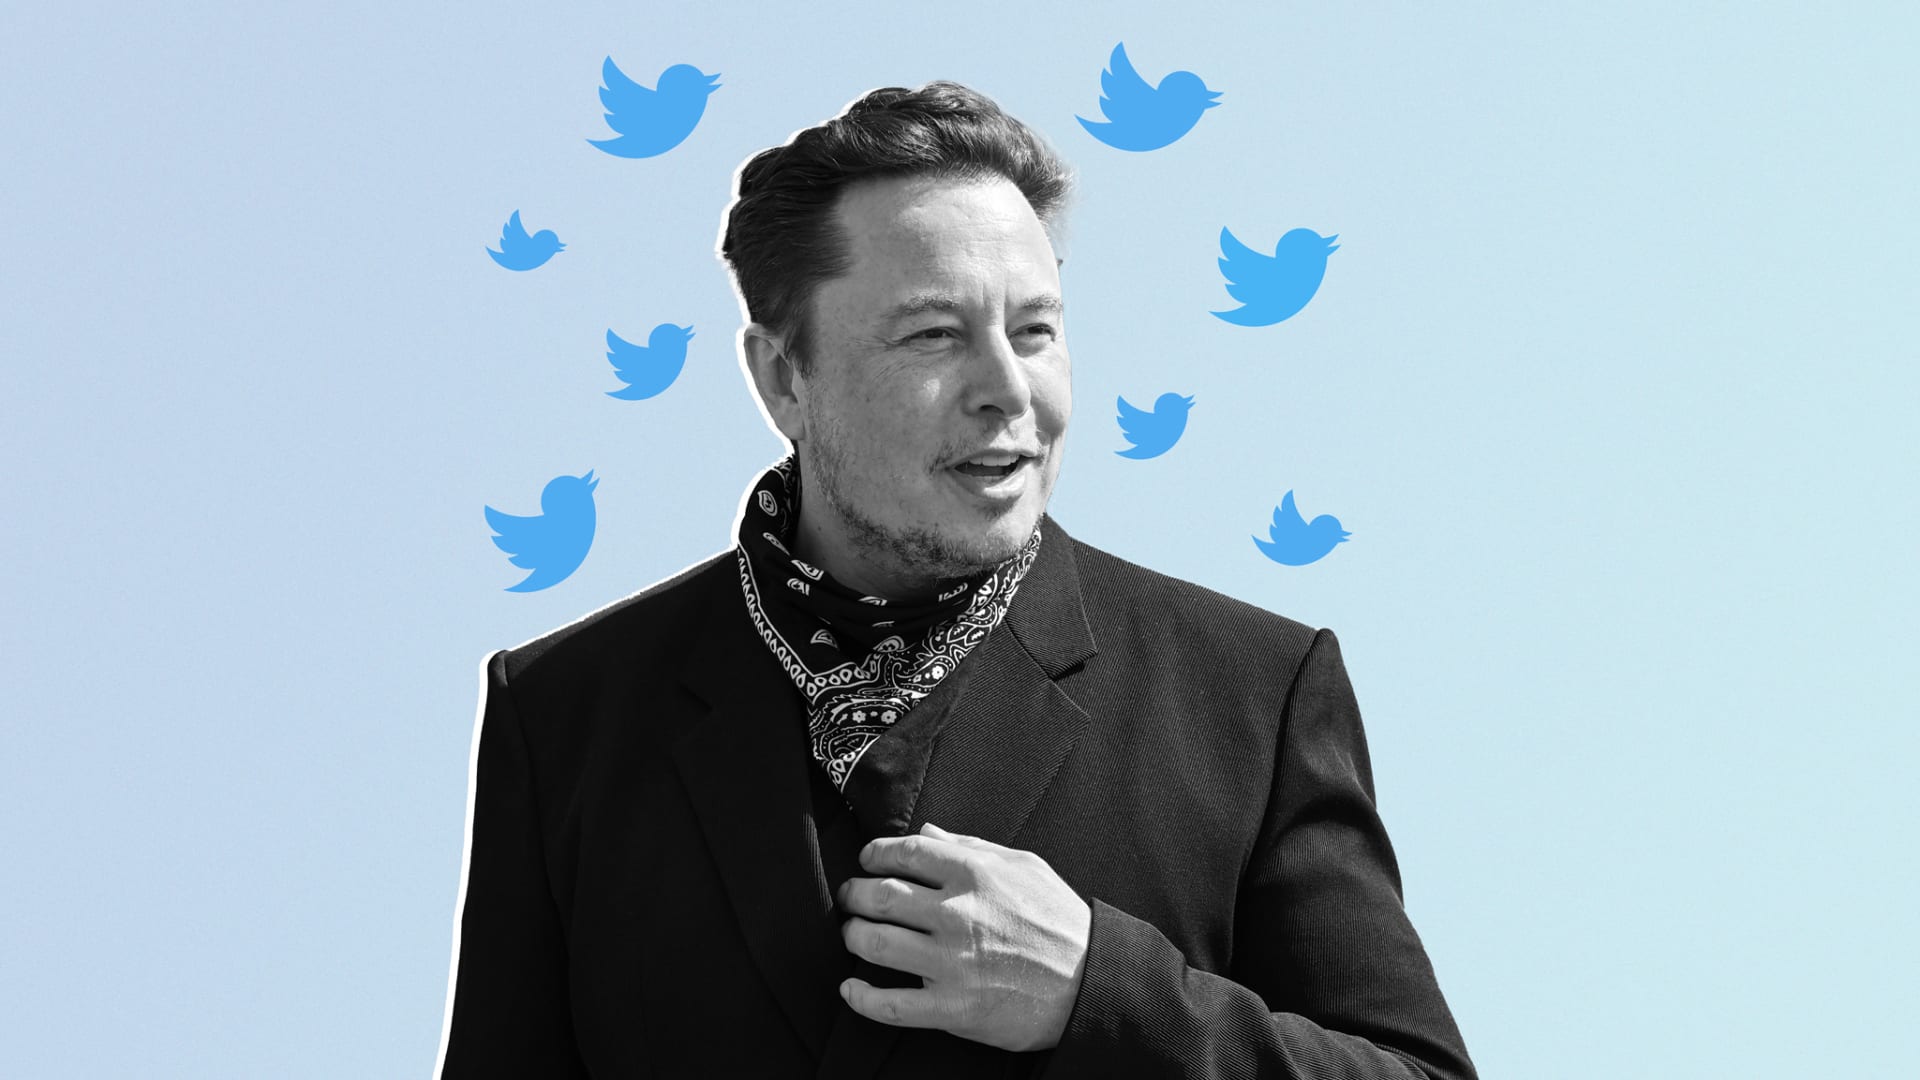 Social Media Antics and Twitter Stunts Work for Elon Musk. But Will it Work for You?